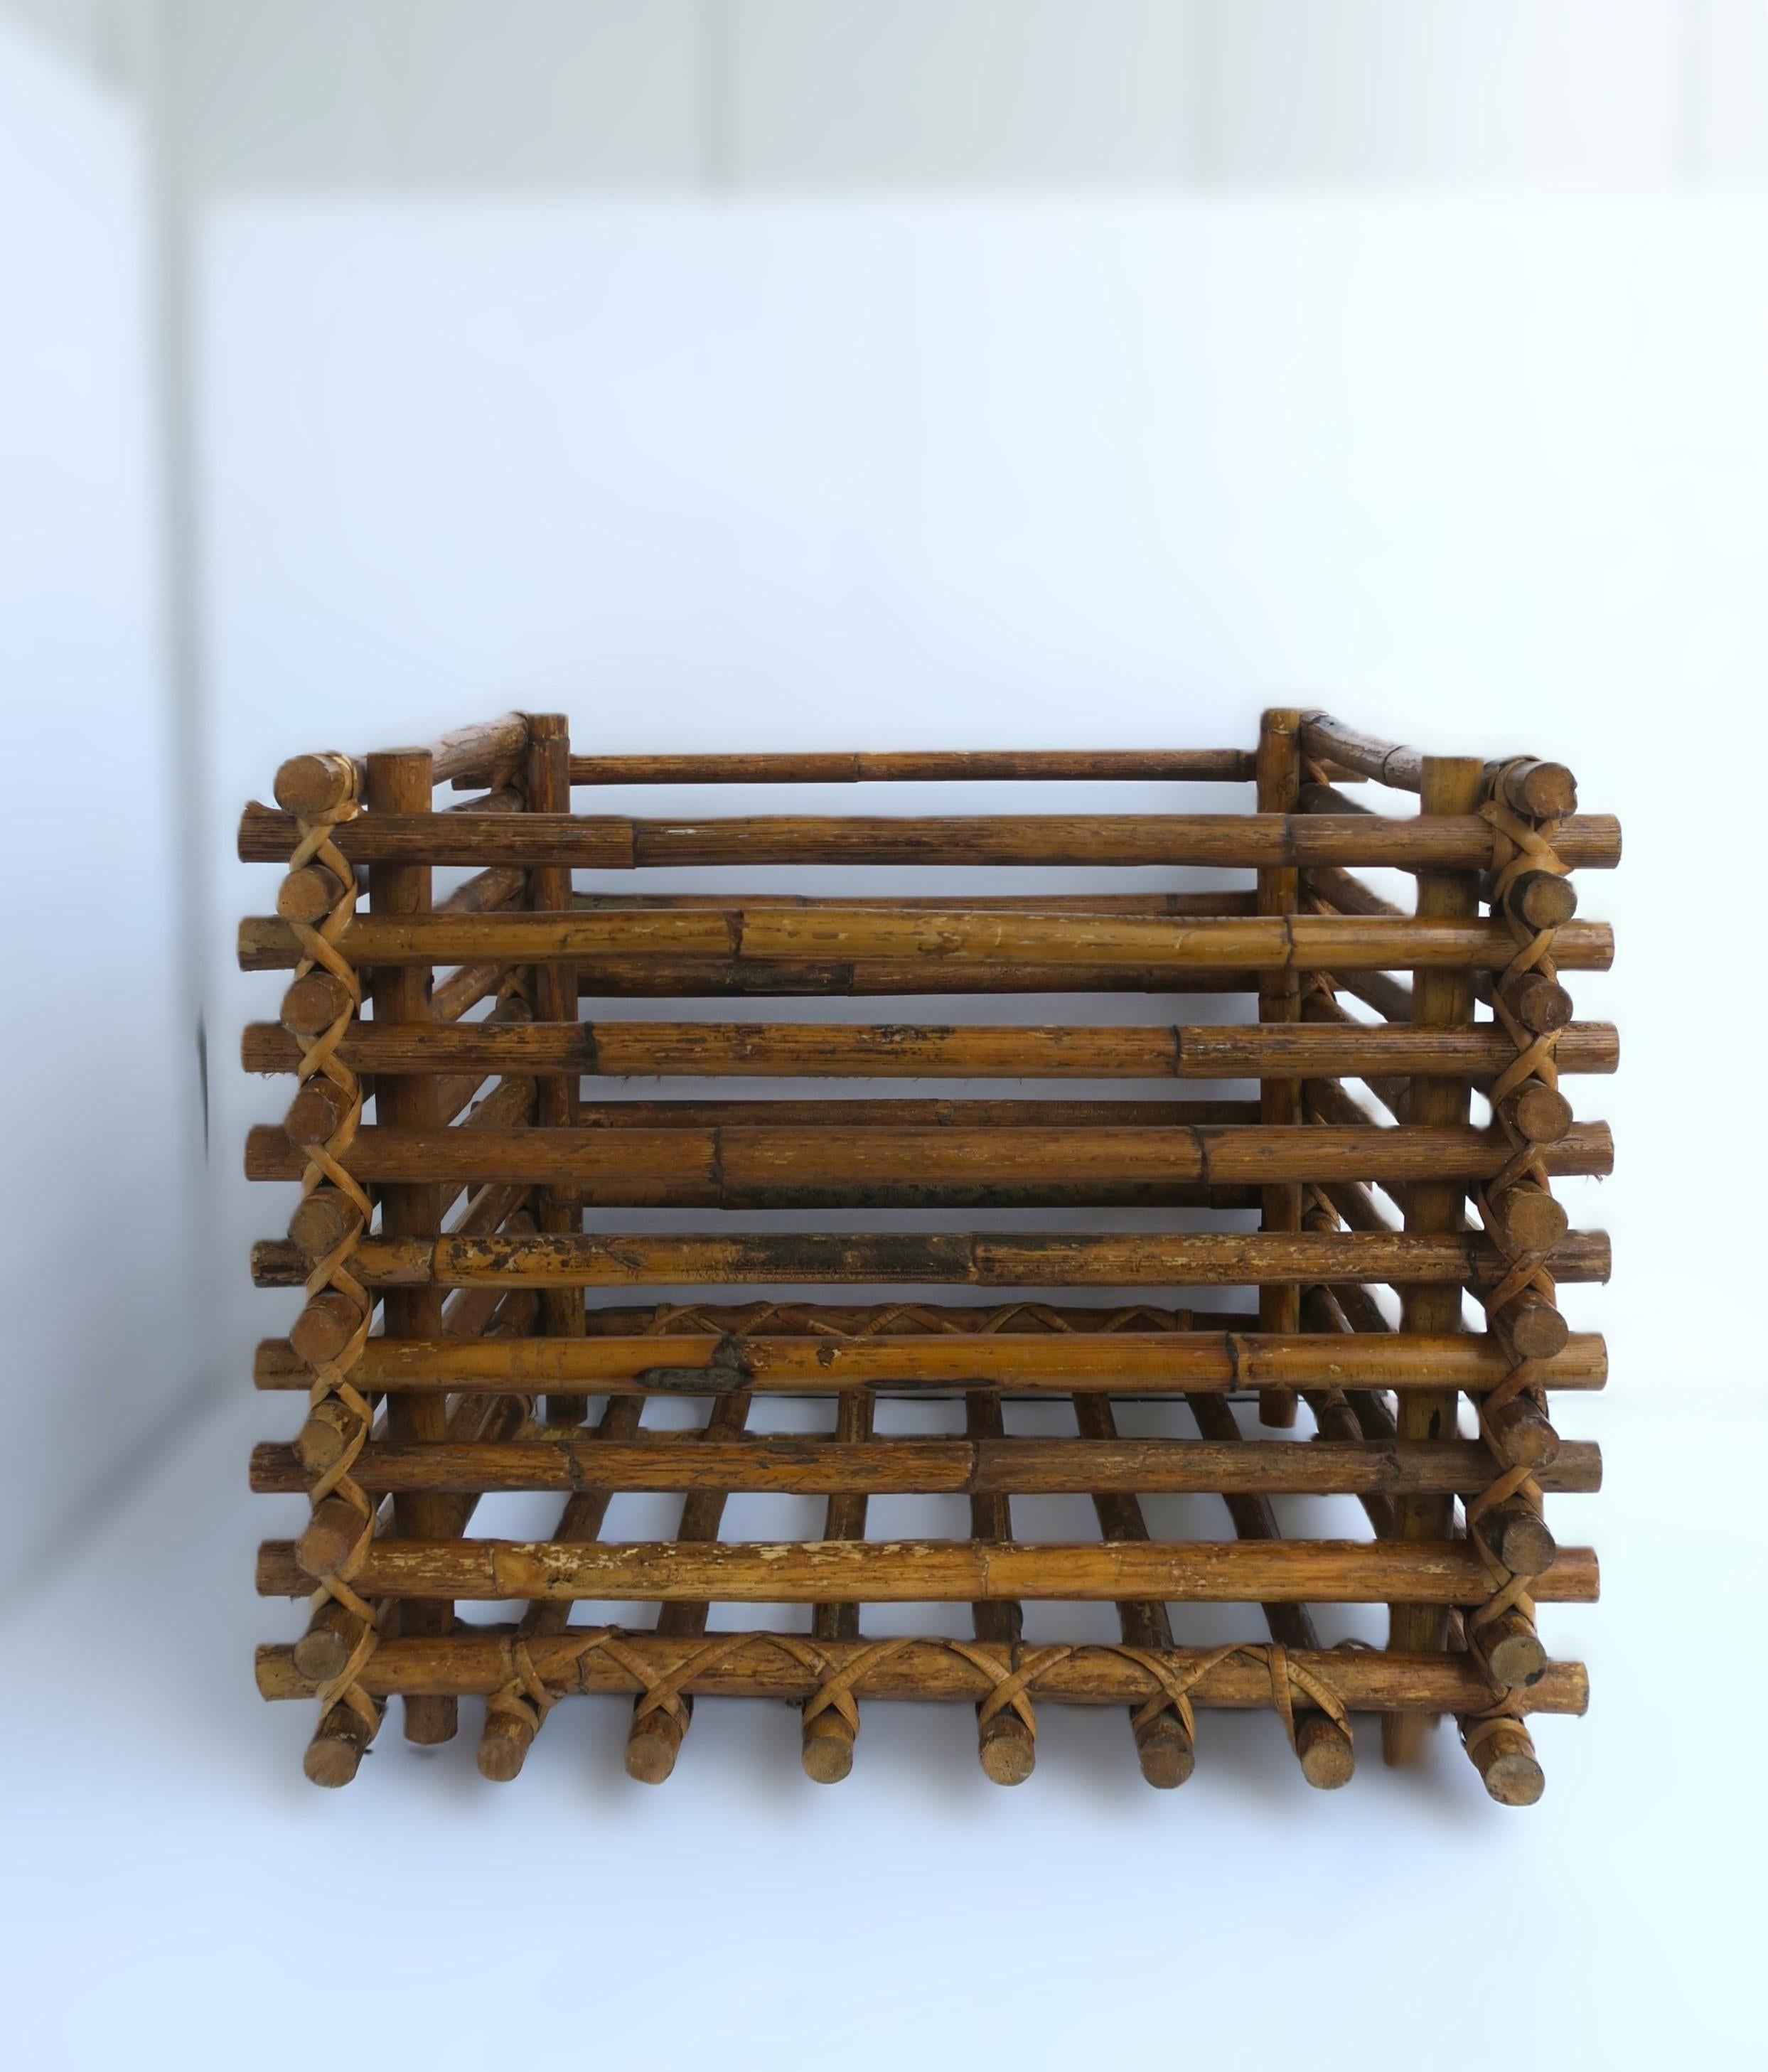 A wicker wrapped square rattan plant or tree holder cachepot. Shown holding faux plant; cachepot can hold larger plant or tree then what I've shown. Piece is a nice size. Internal dimensions: 18.25 x 18.25 x 15.75